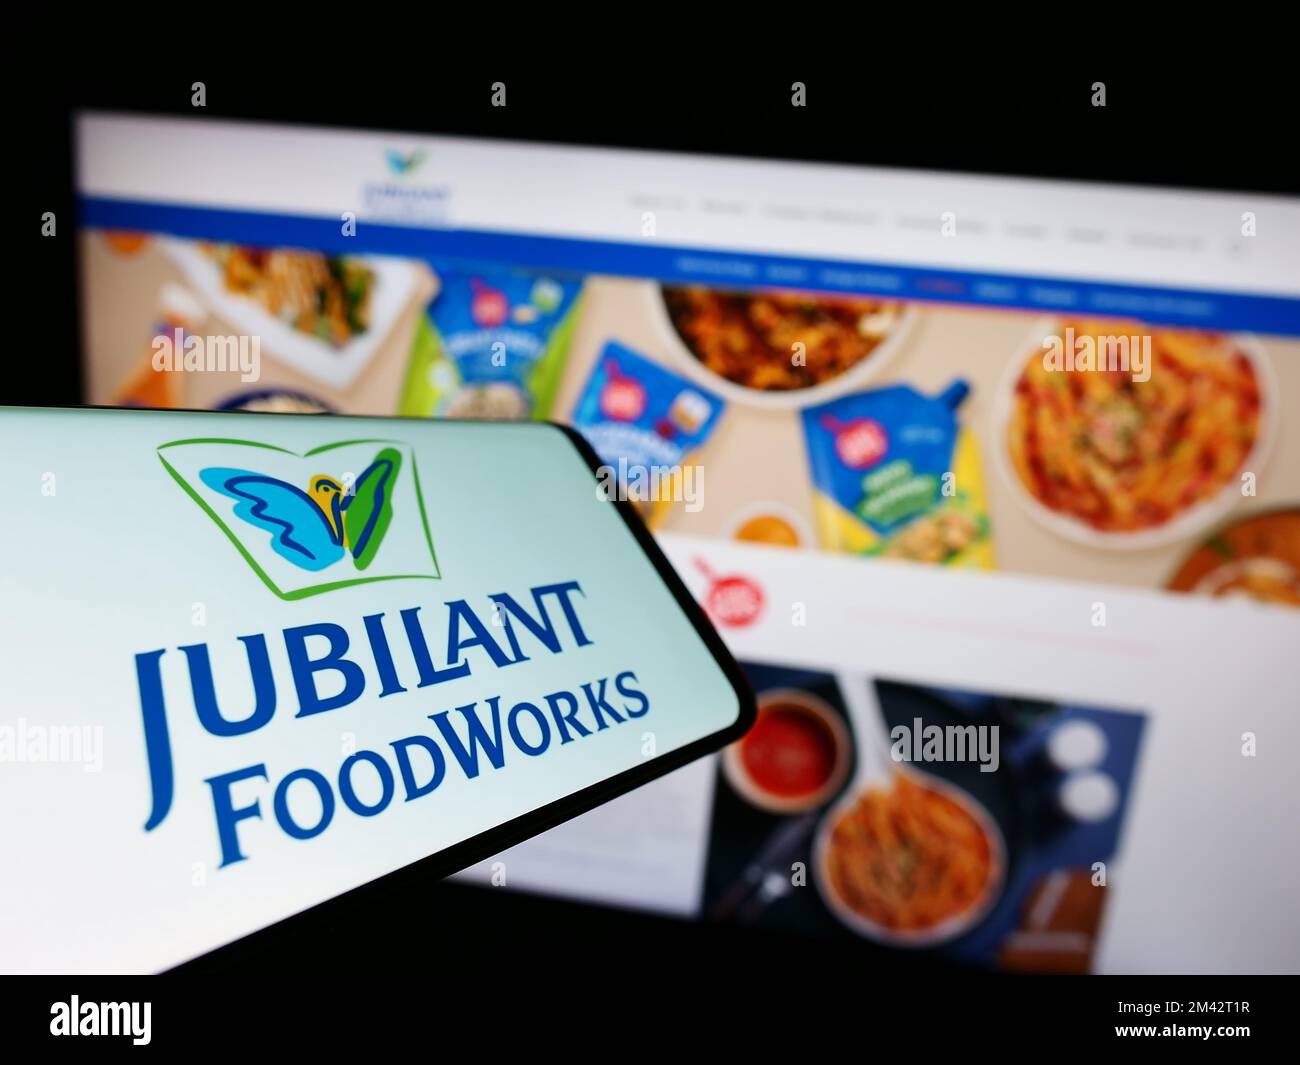 Cellphone with logo of Indian food company Jubilant FoodWorks Limited on screen in front of website. Focus on center-left of phone display. Stock Photo